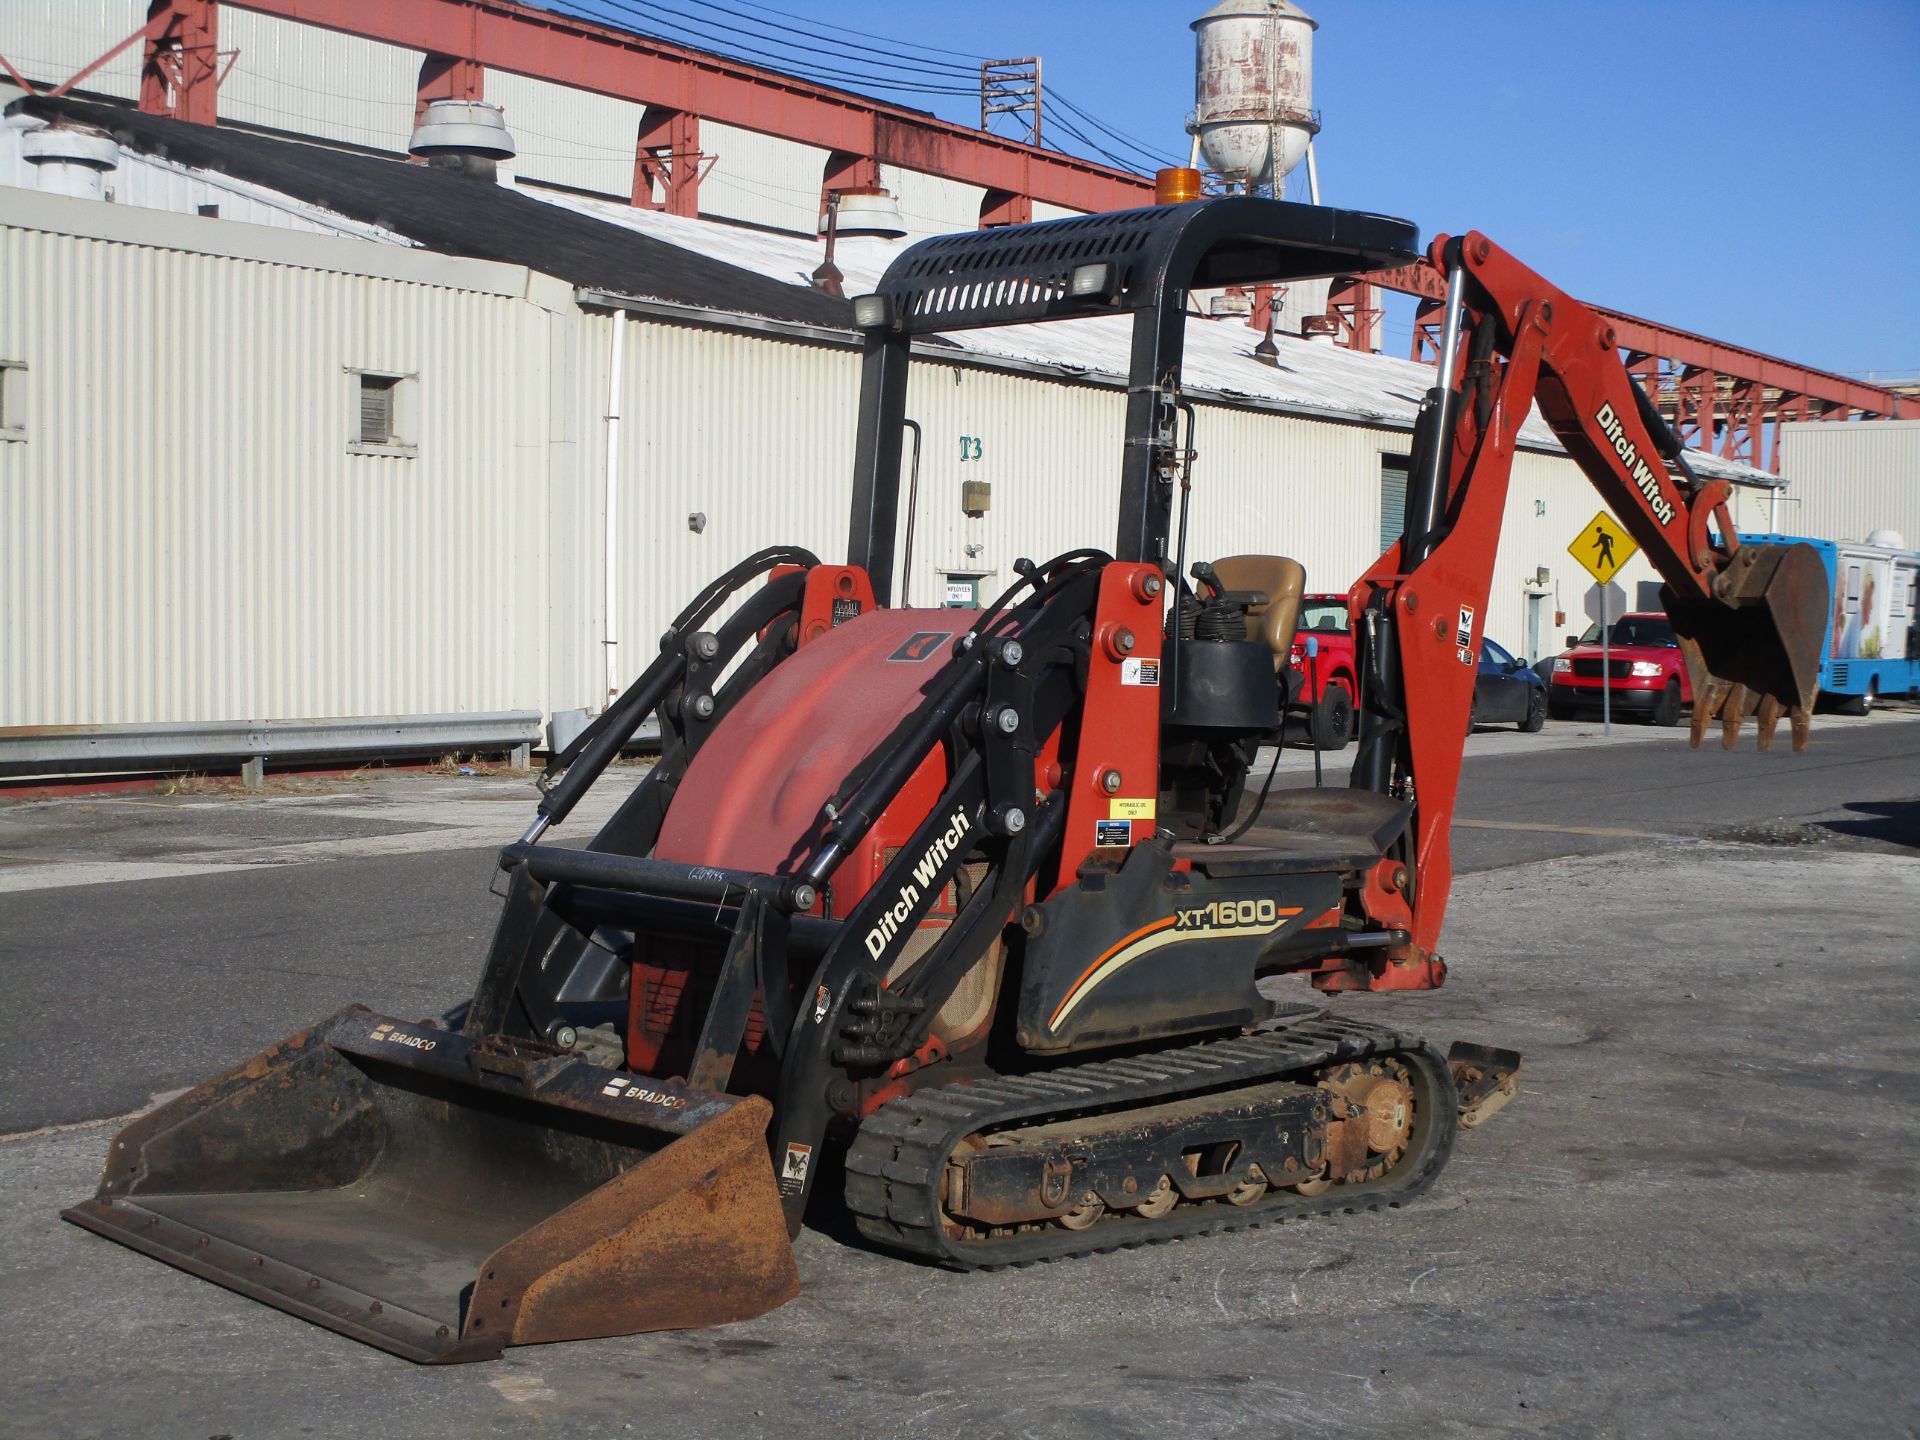 2012 Ditch Witch XT1600 Backhoe - Image 2 of 23